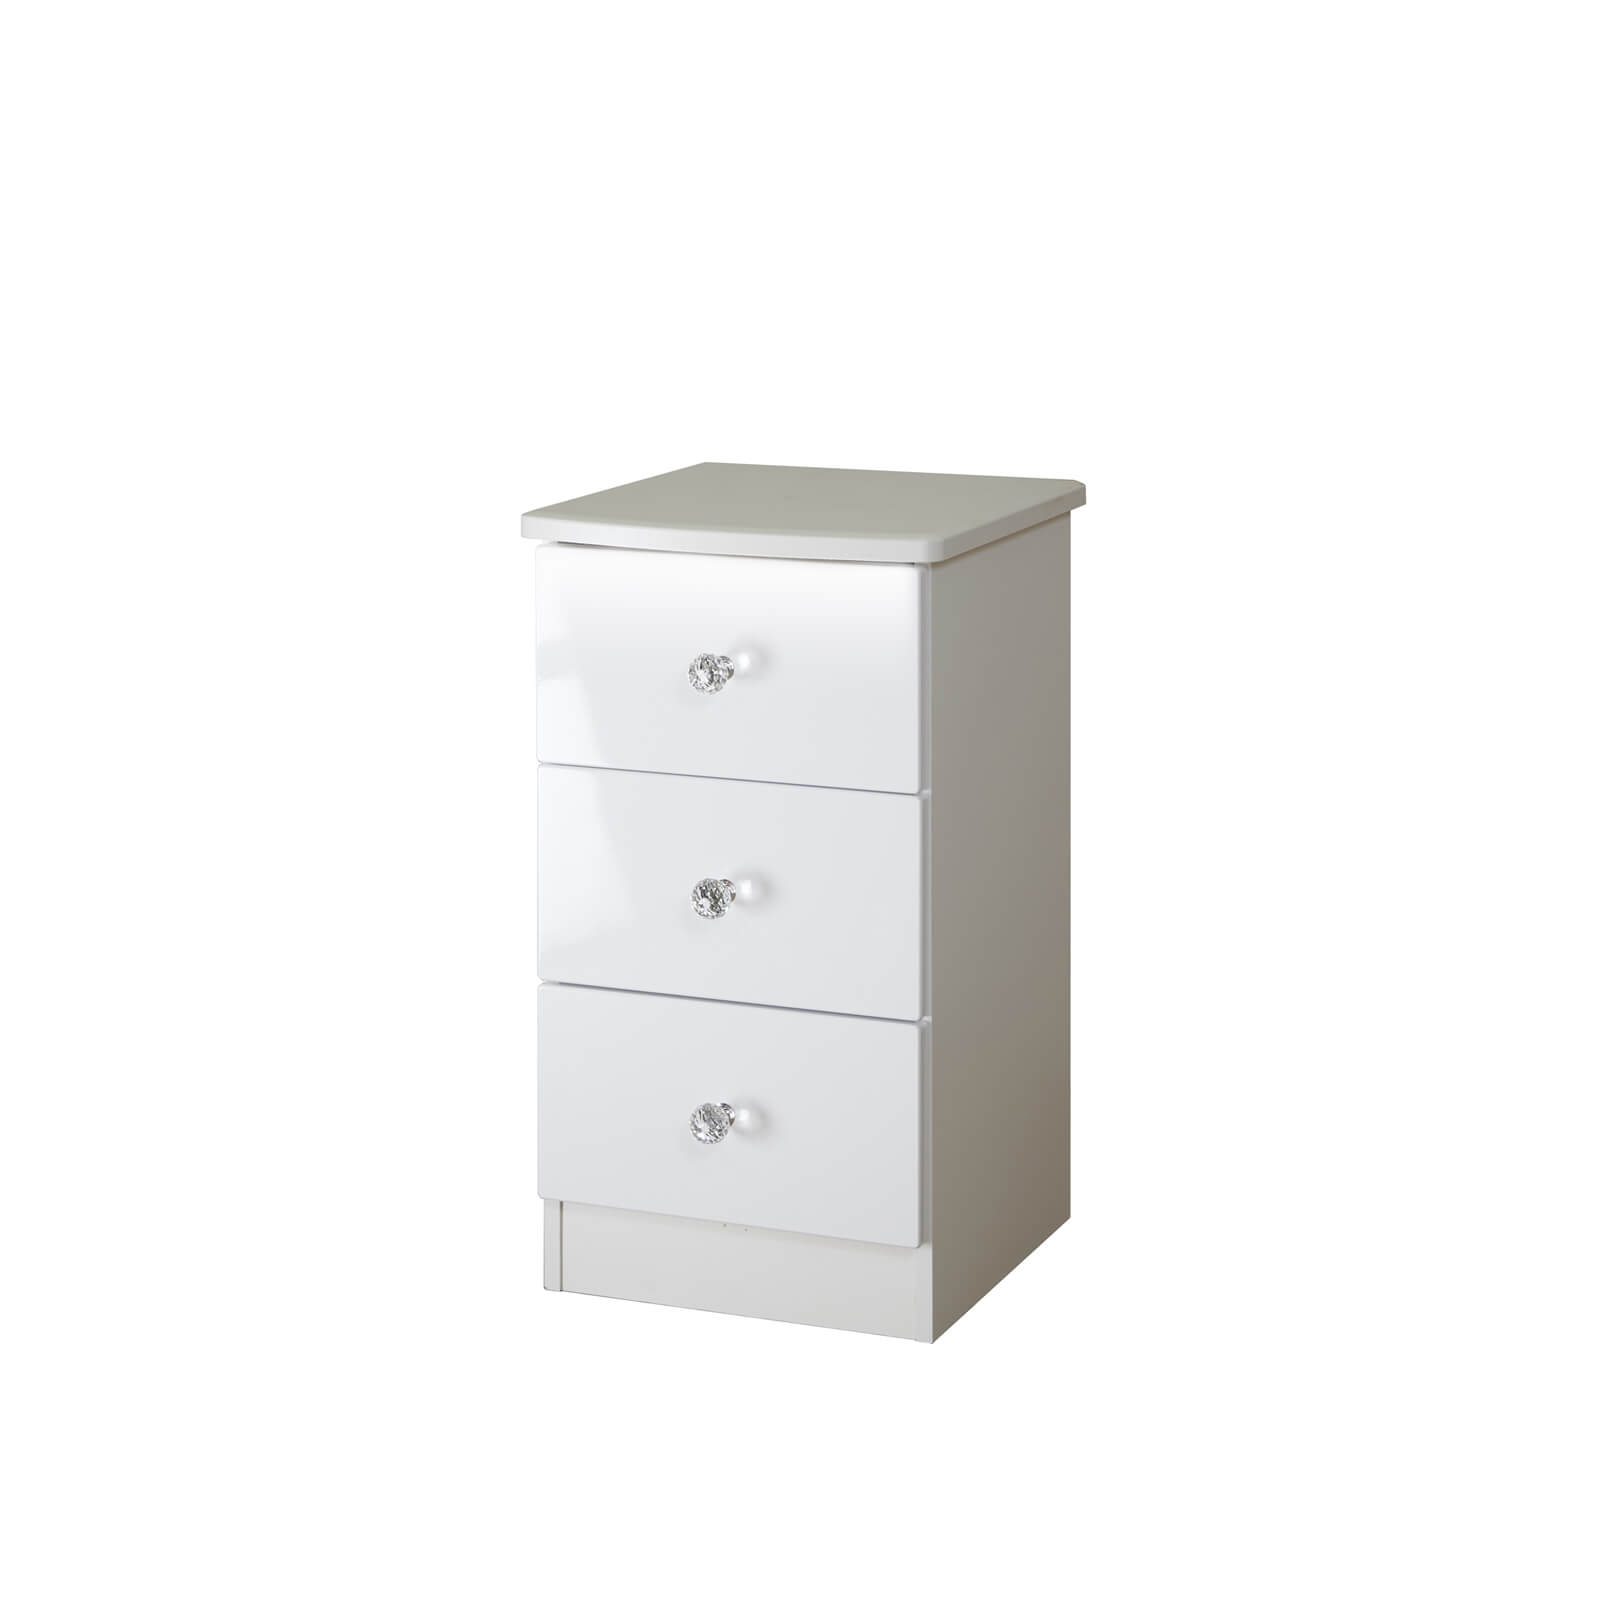 Lumo 3 Drawer Bedside Table with LED Lighting - White